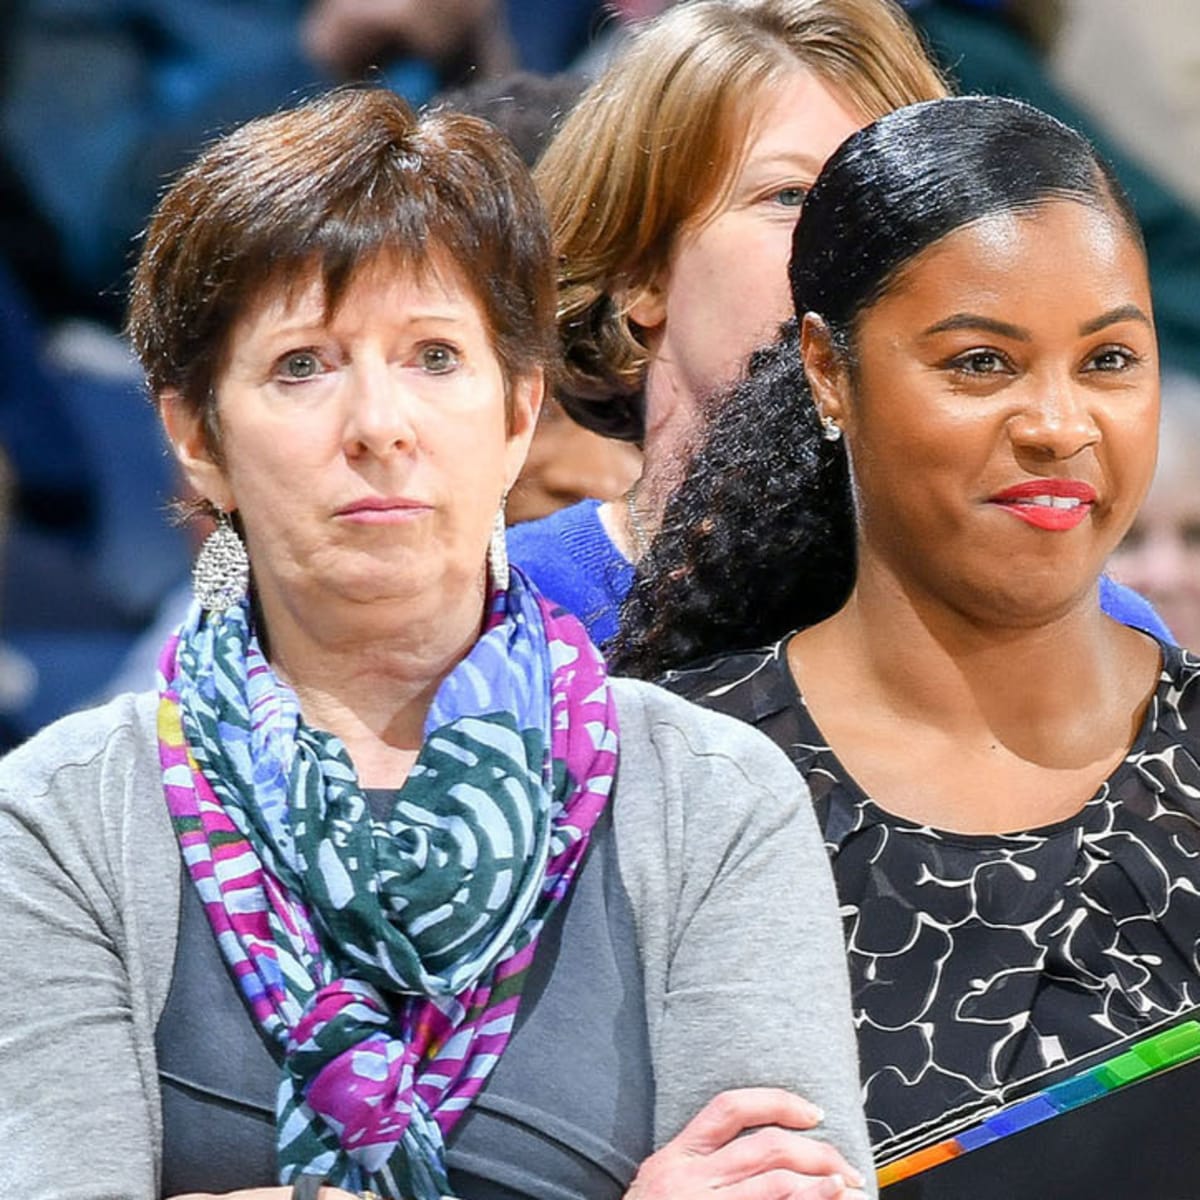 Niele Ivey succeeds Muffet McGraw as Notre Dame head coach - Sports  Illustrated